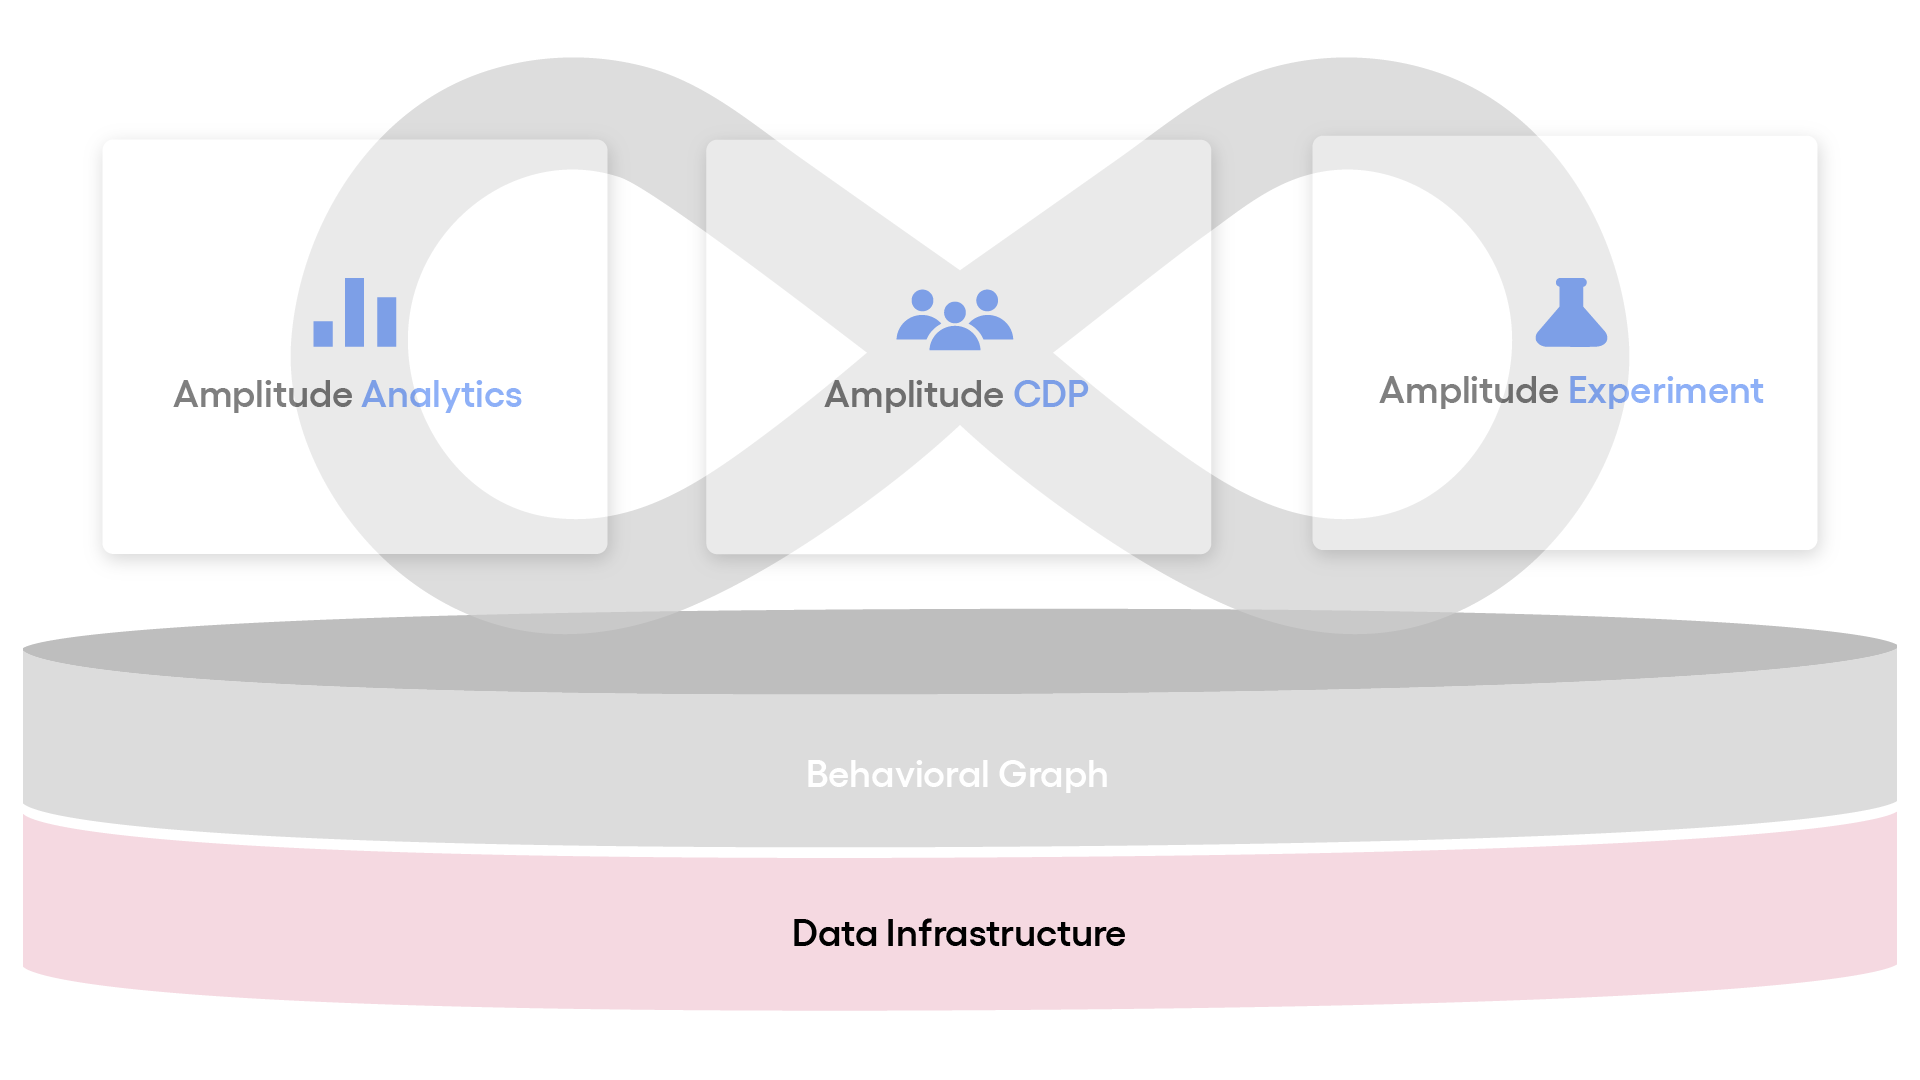 Amplitude analytics, CDP, Experiment, behavioral Graph and Data Infrastructure 